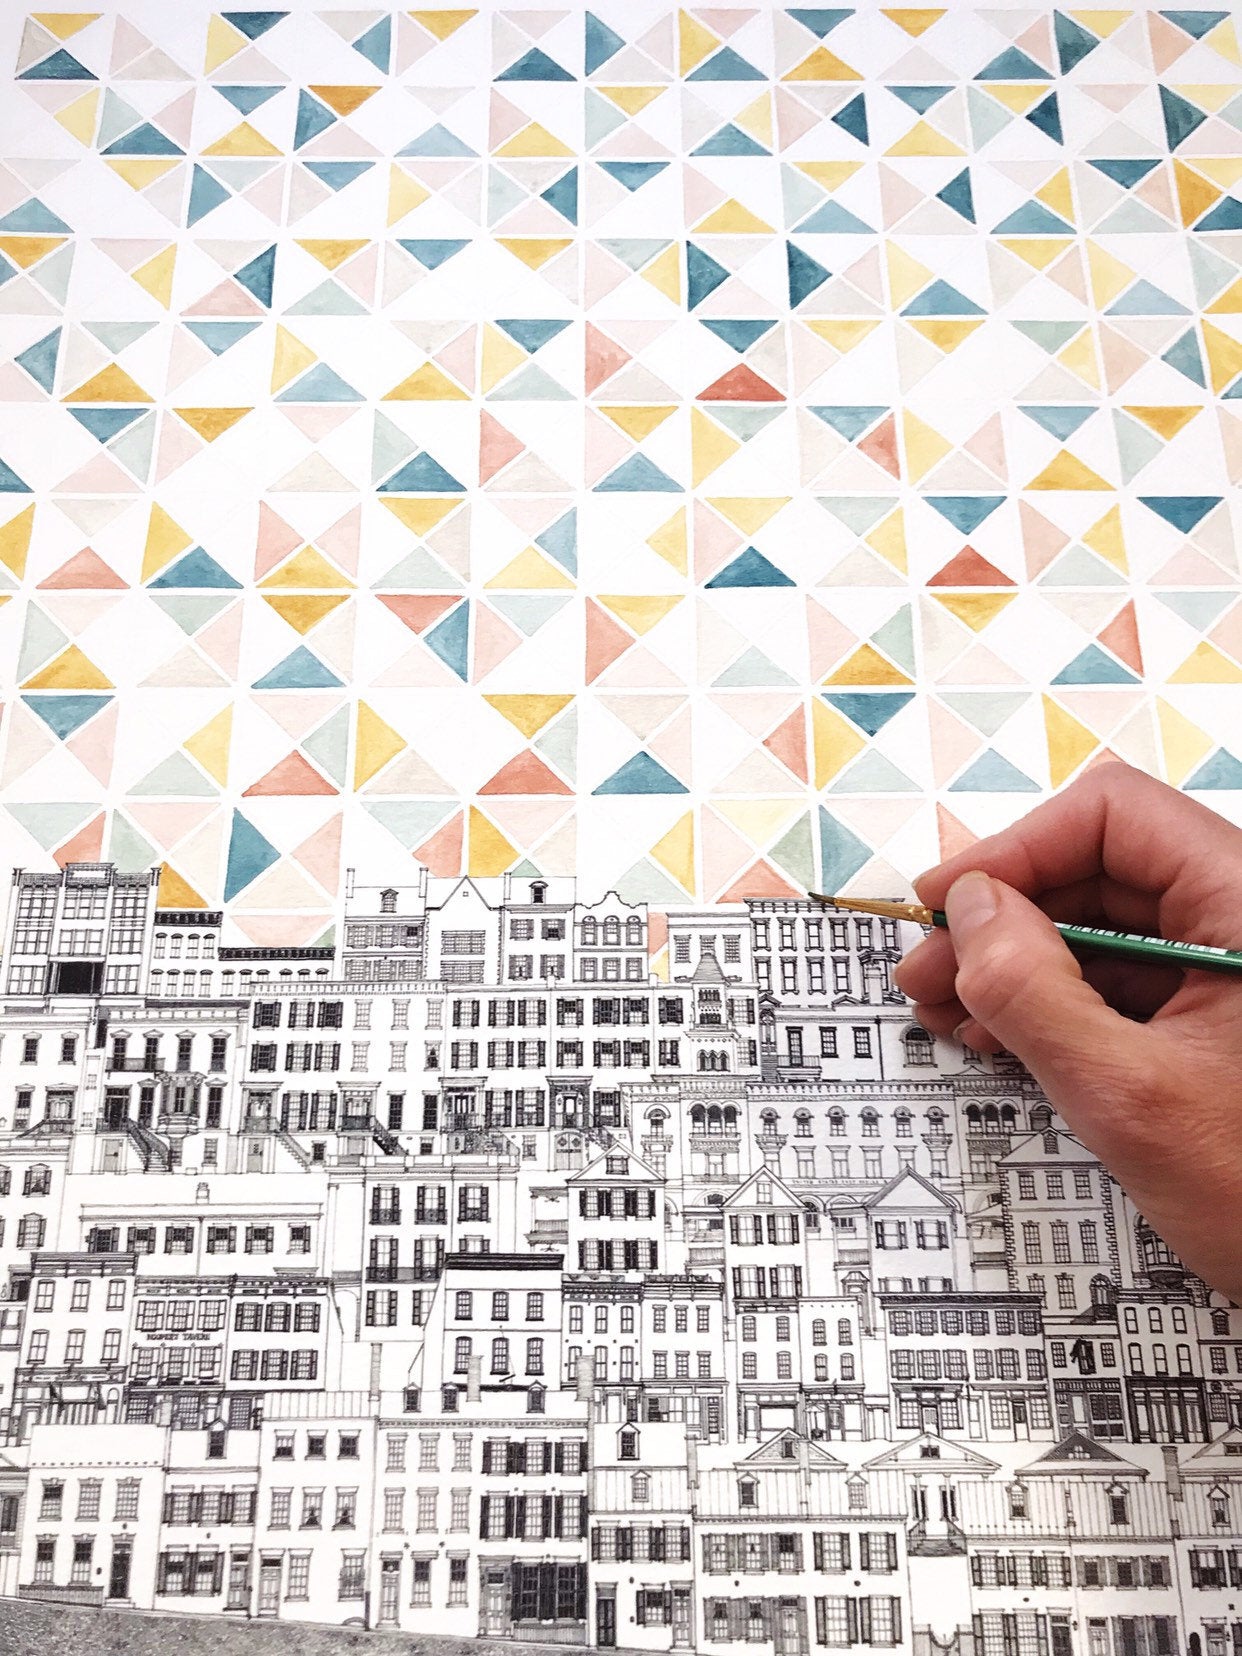 CityScape Architectural Drawing + Geometric Sky: ORIGINAL PAINTING (Commission)